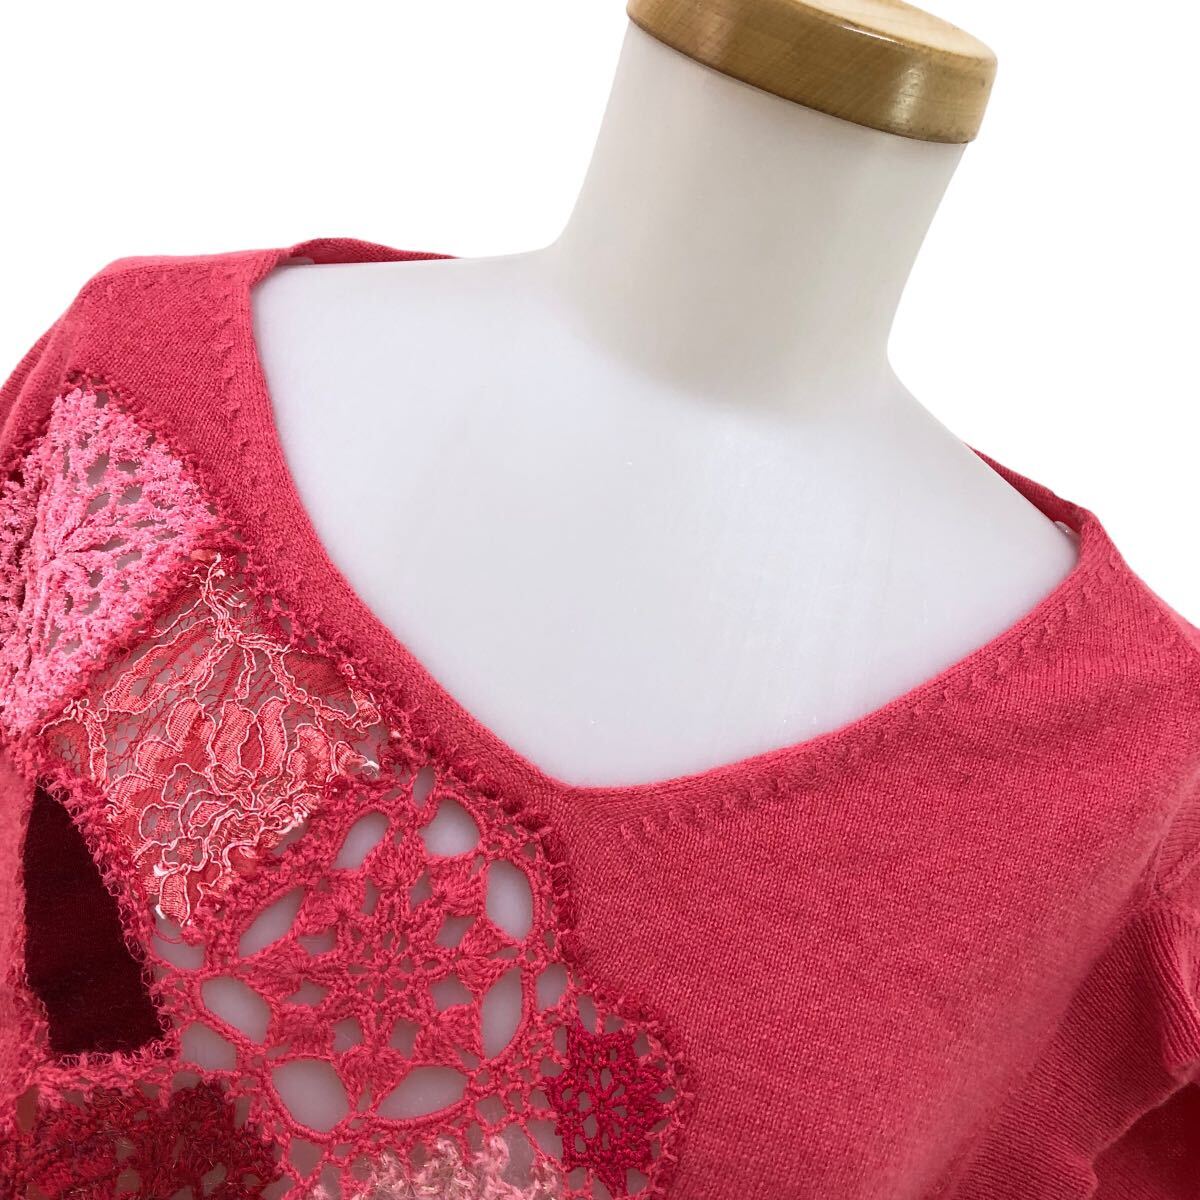 S203 TSUMORI CHISATO Tsumori Chisato knitted sweater short sleeves sweater knitted cashmere . wool wool . tops lady's 2 pink 